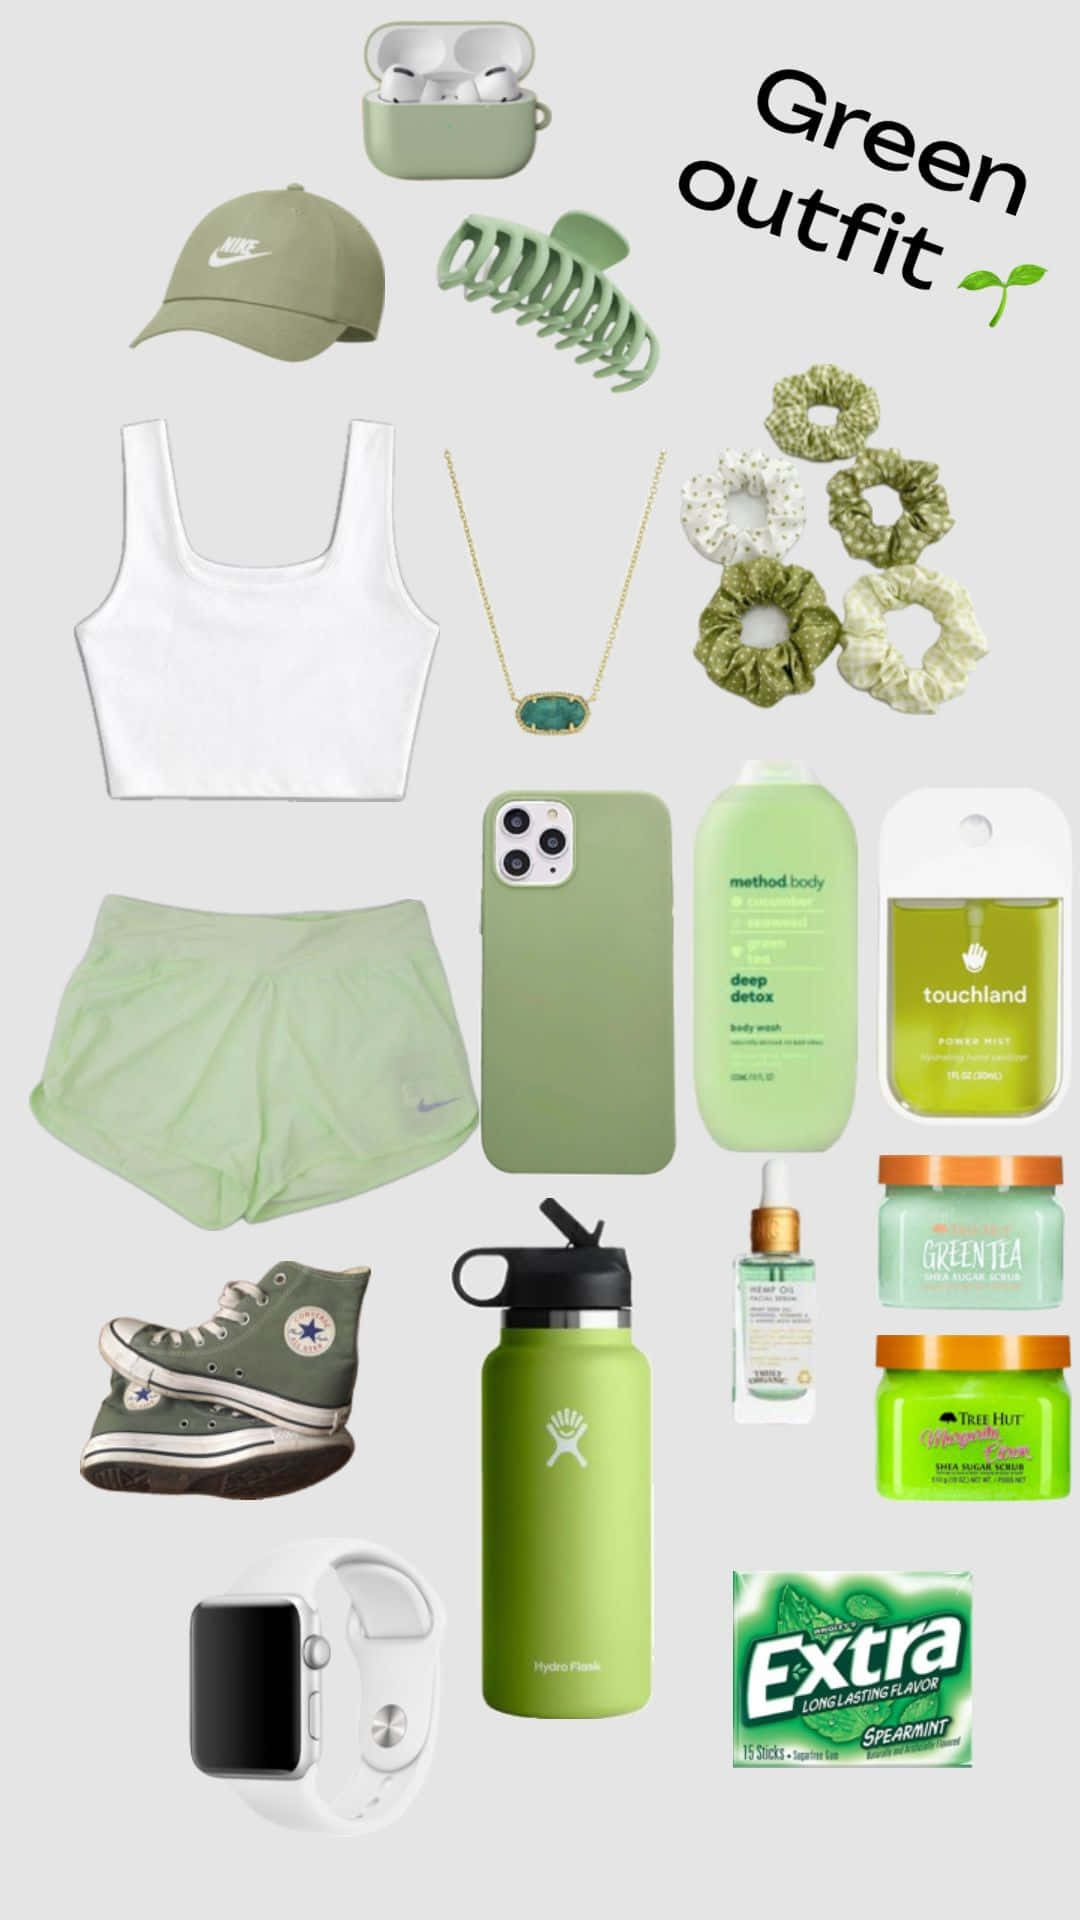 Green Preppy Outfit Accessories Wallpaper